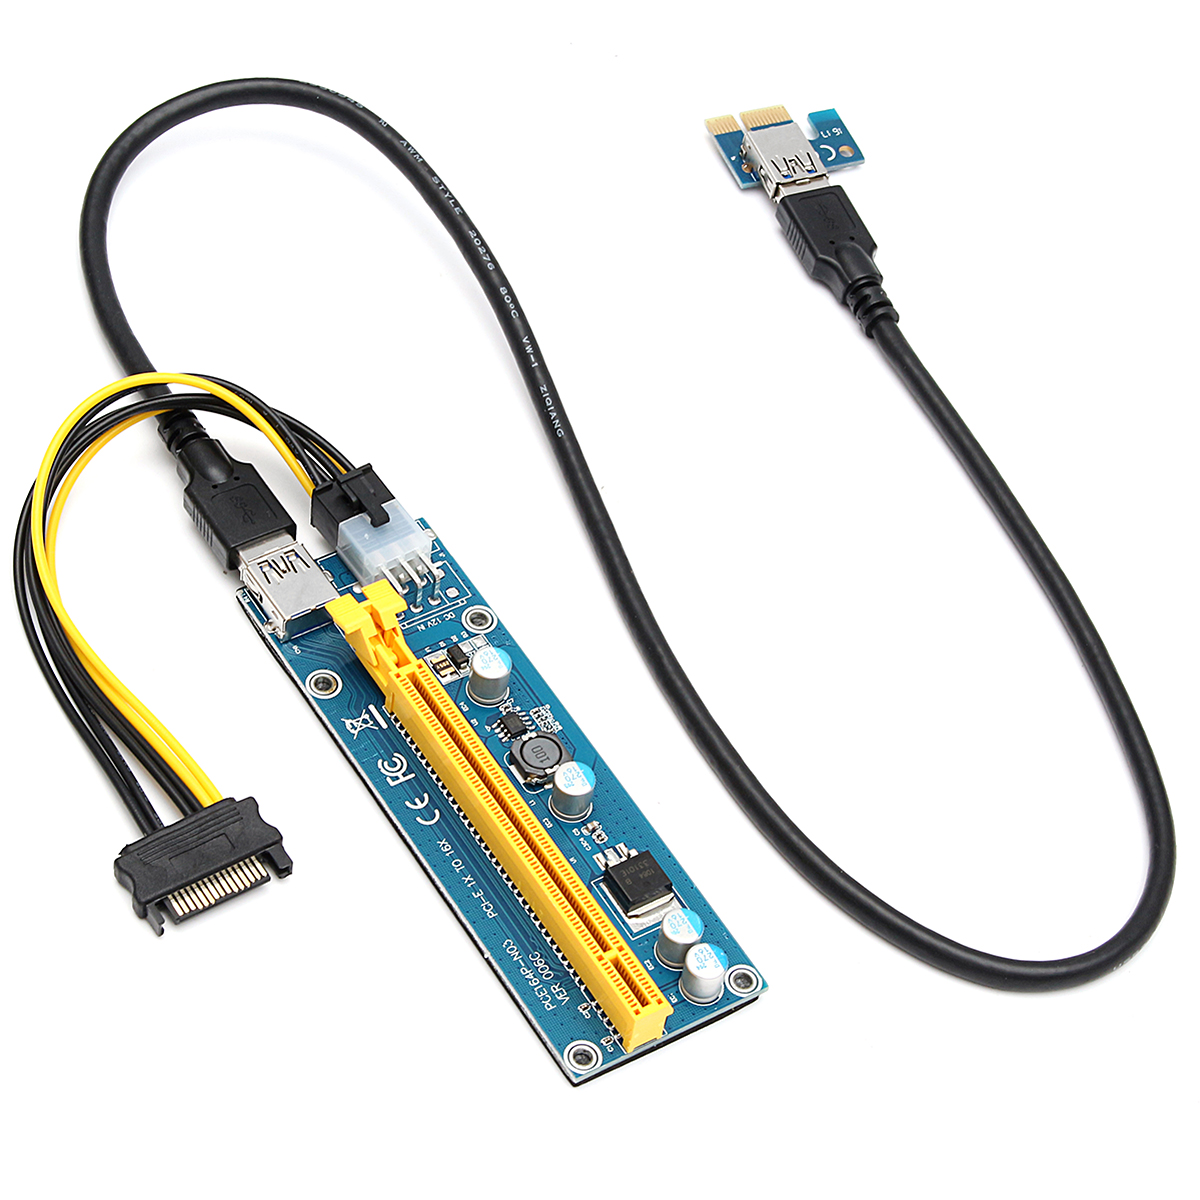 

60cm USB3.0 PCI-E 1x To16x Extender Riser Card Adapter Power Cable For ETH GPU Mining